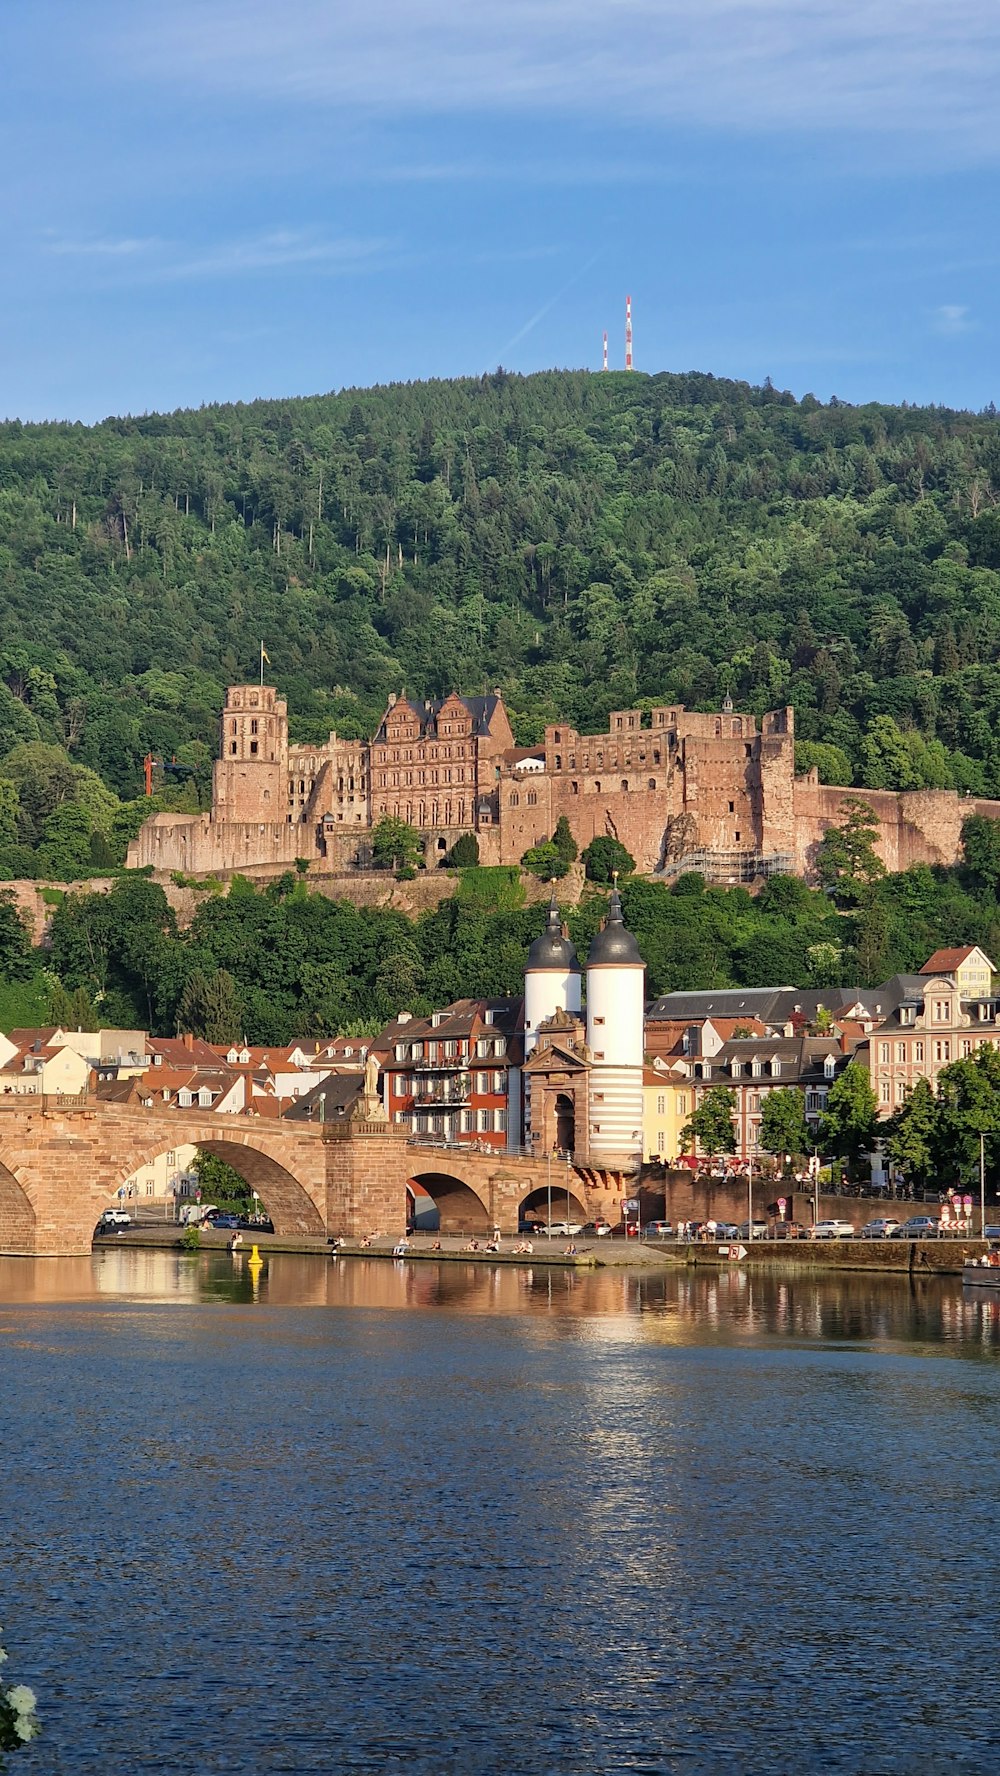 a bridge over a body of water with a castle in the background